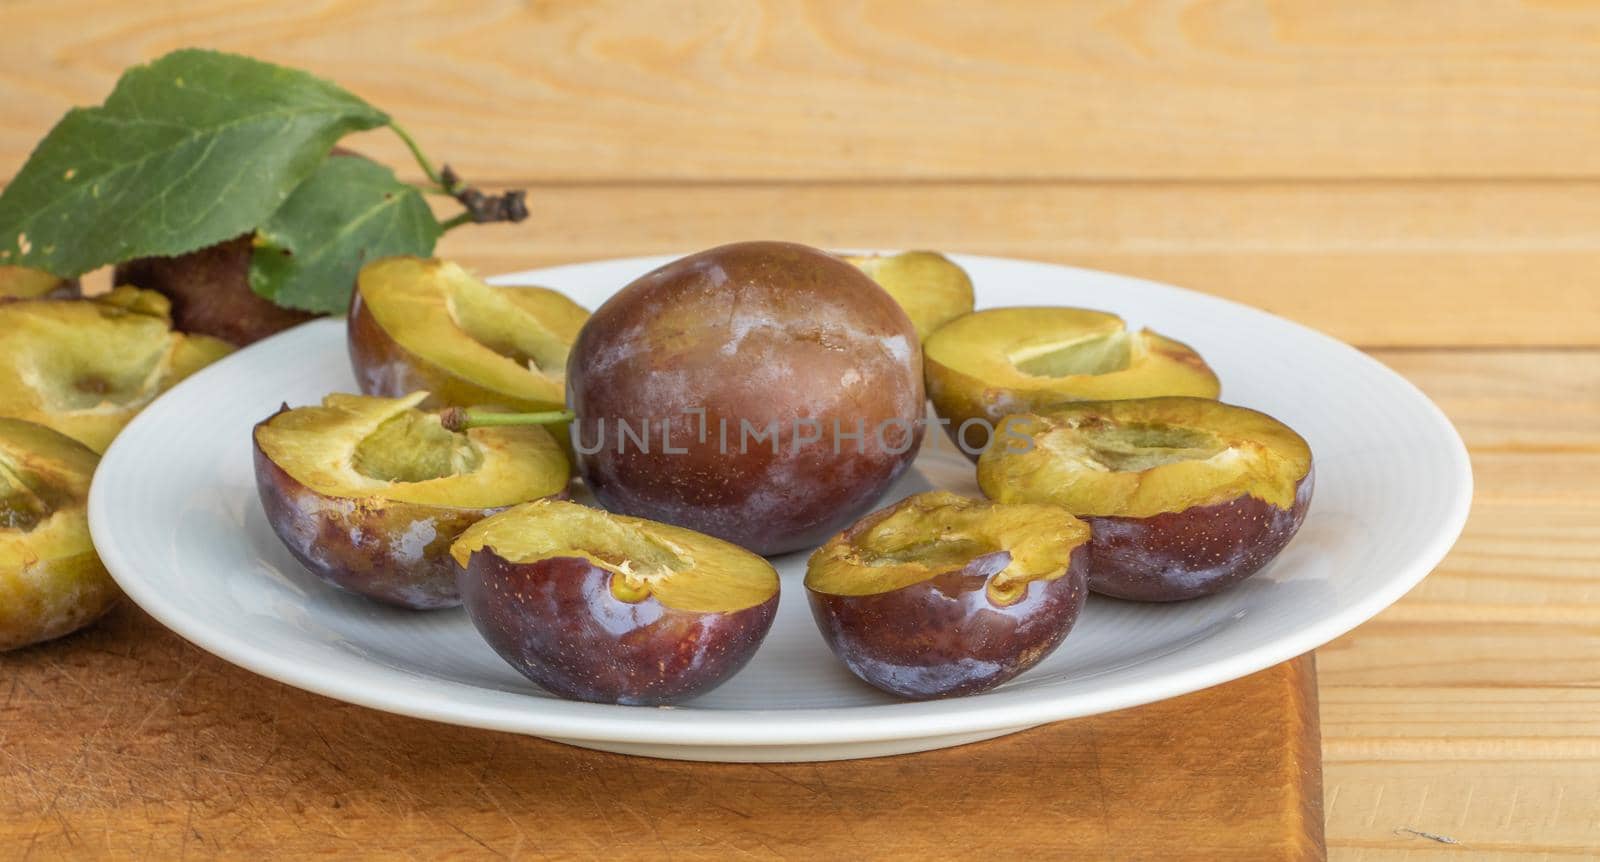 Fresh juicy plums on a wooden background by Mindru